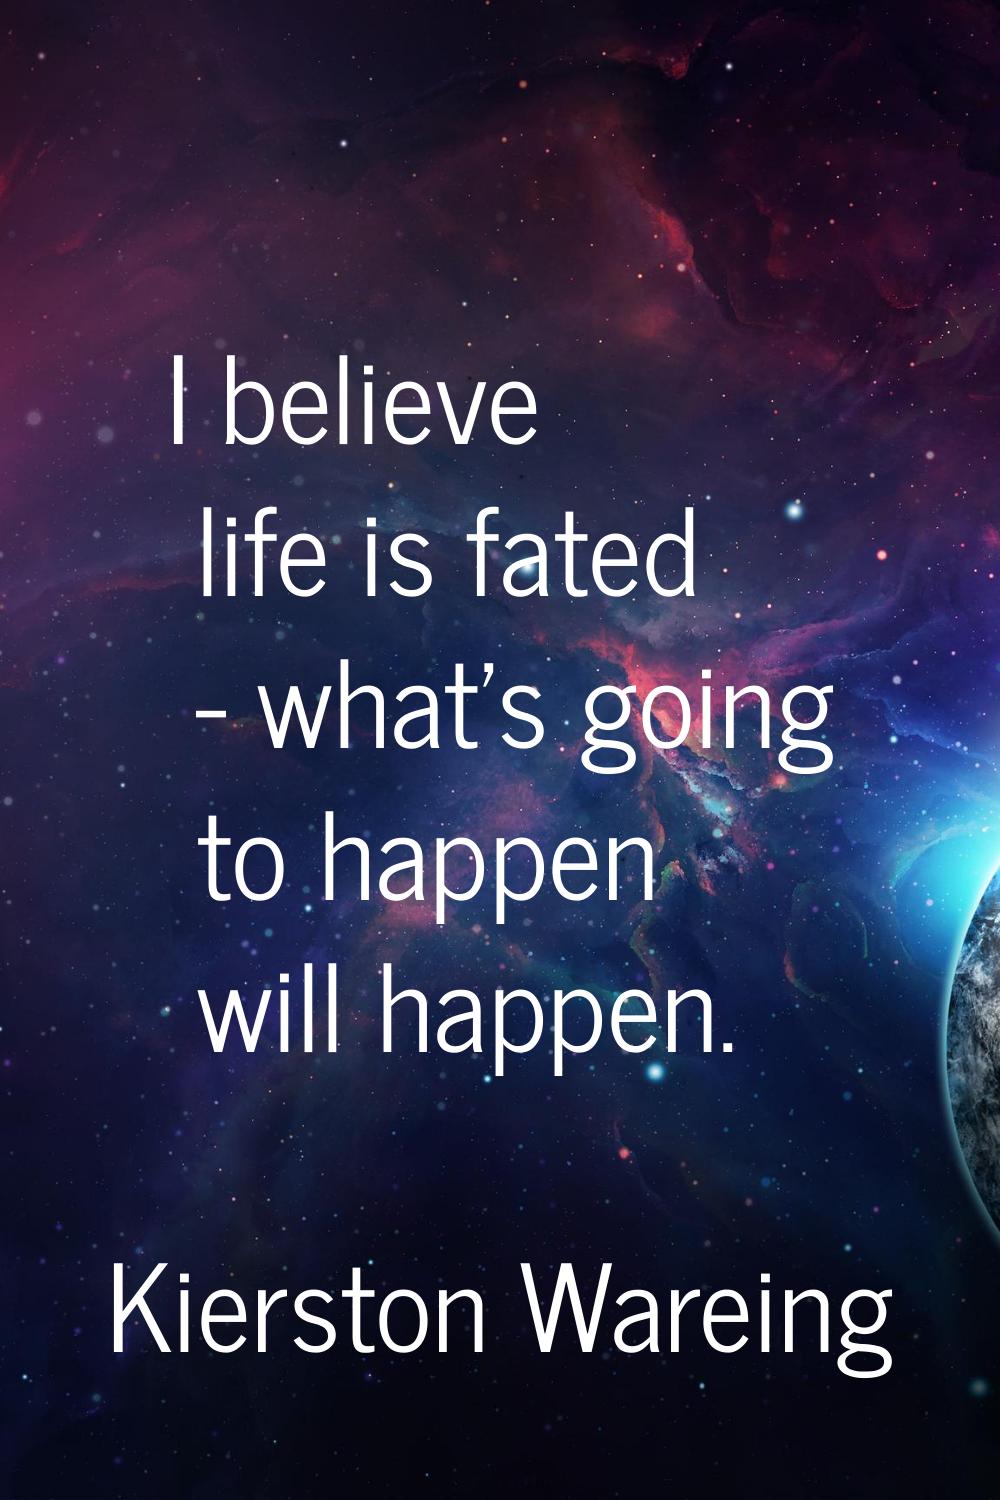 I believe life is fated - what's going to happen will happen.